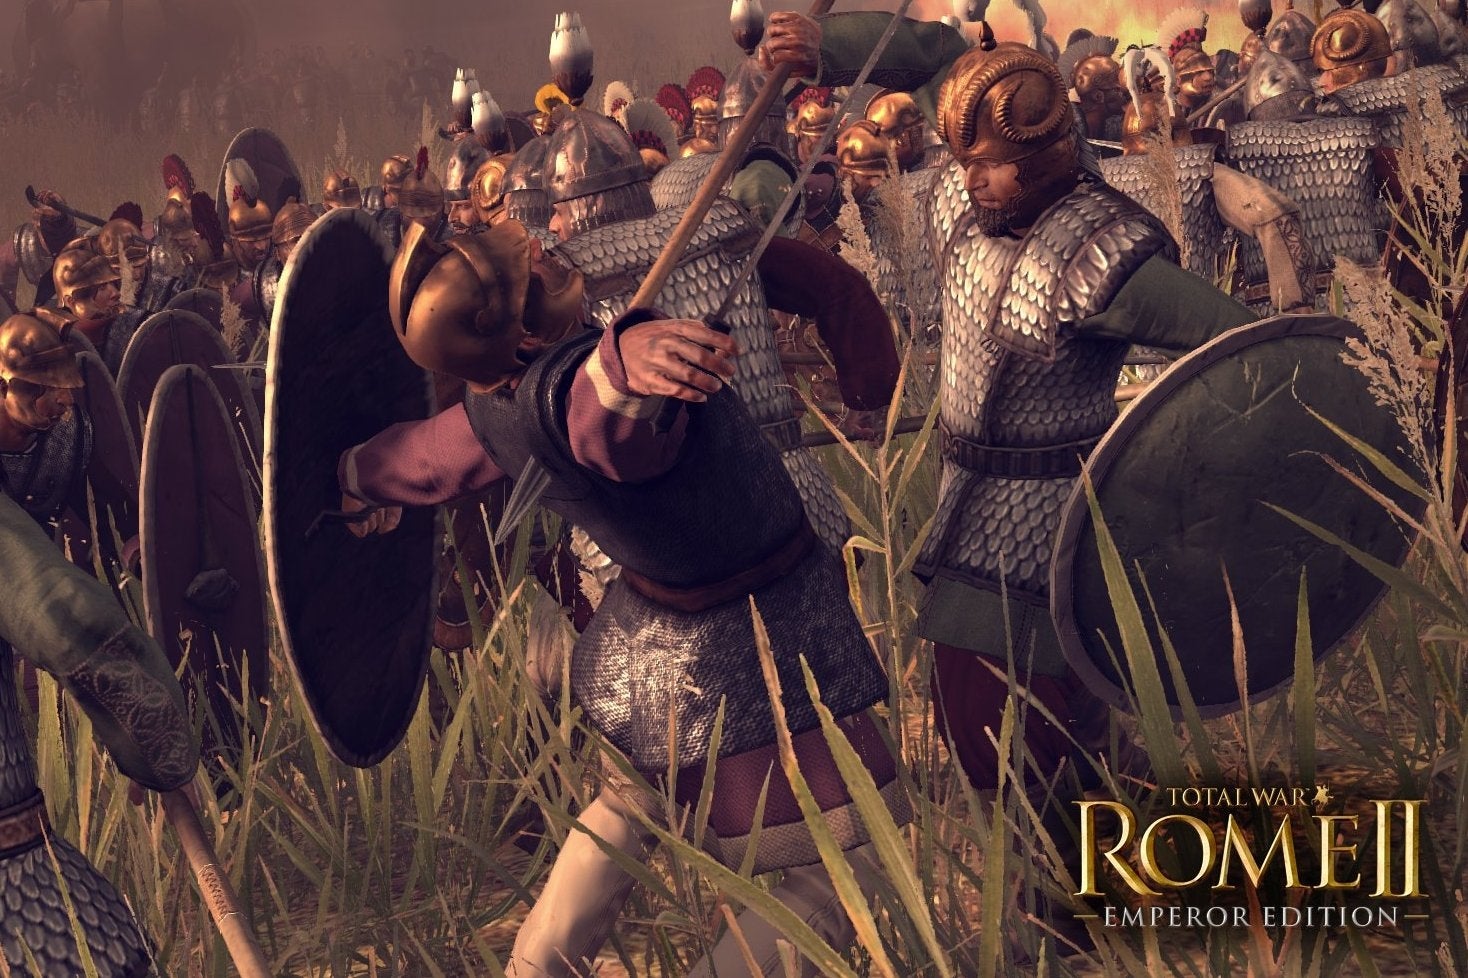 Image for Total War: Rome 2 Emperor Edition announced